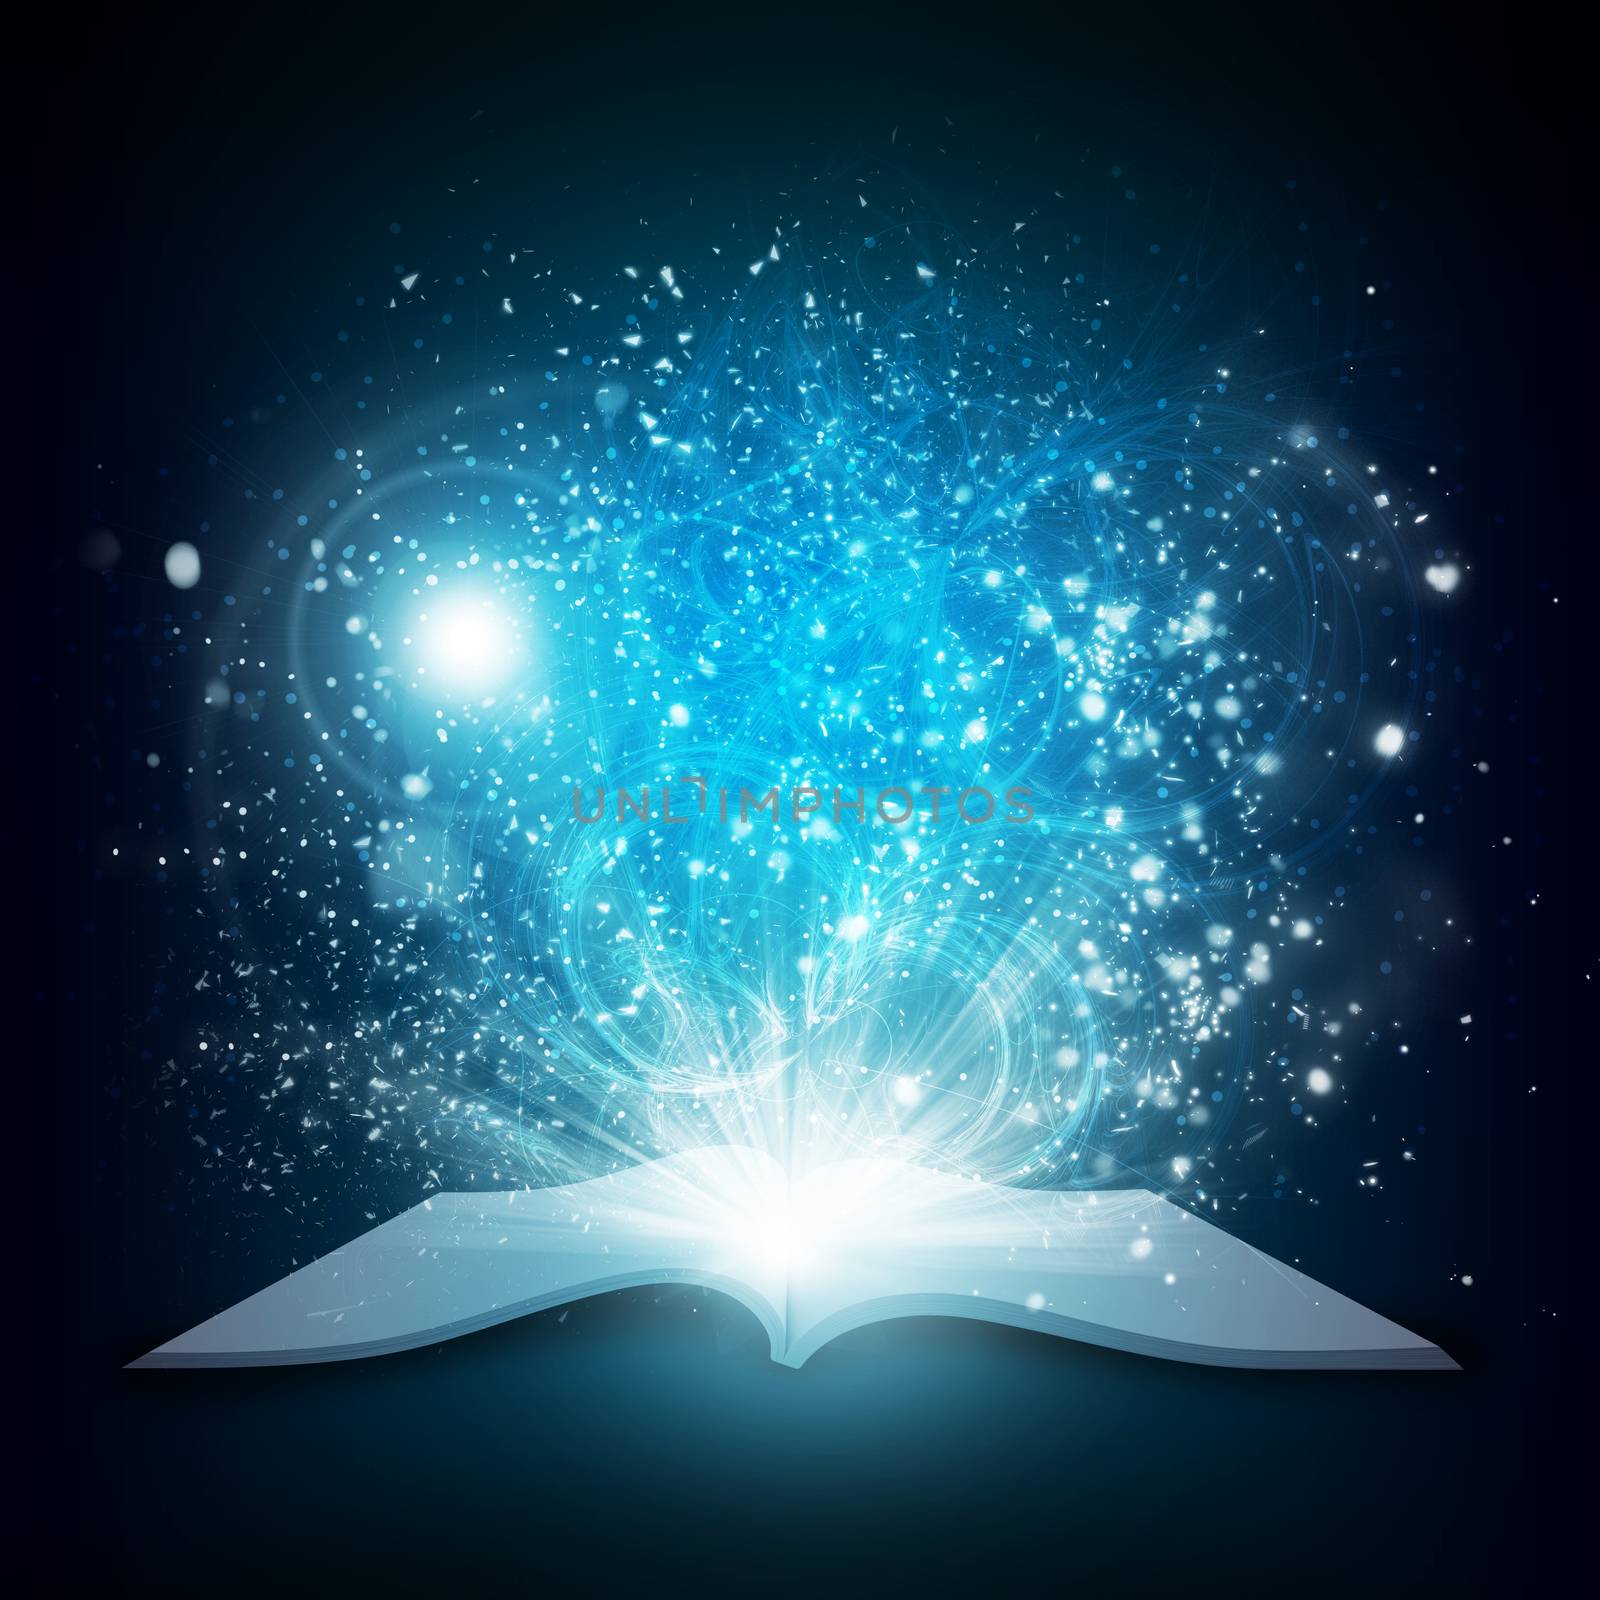 Old open book with magic light and falling stars by cherezoff